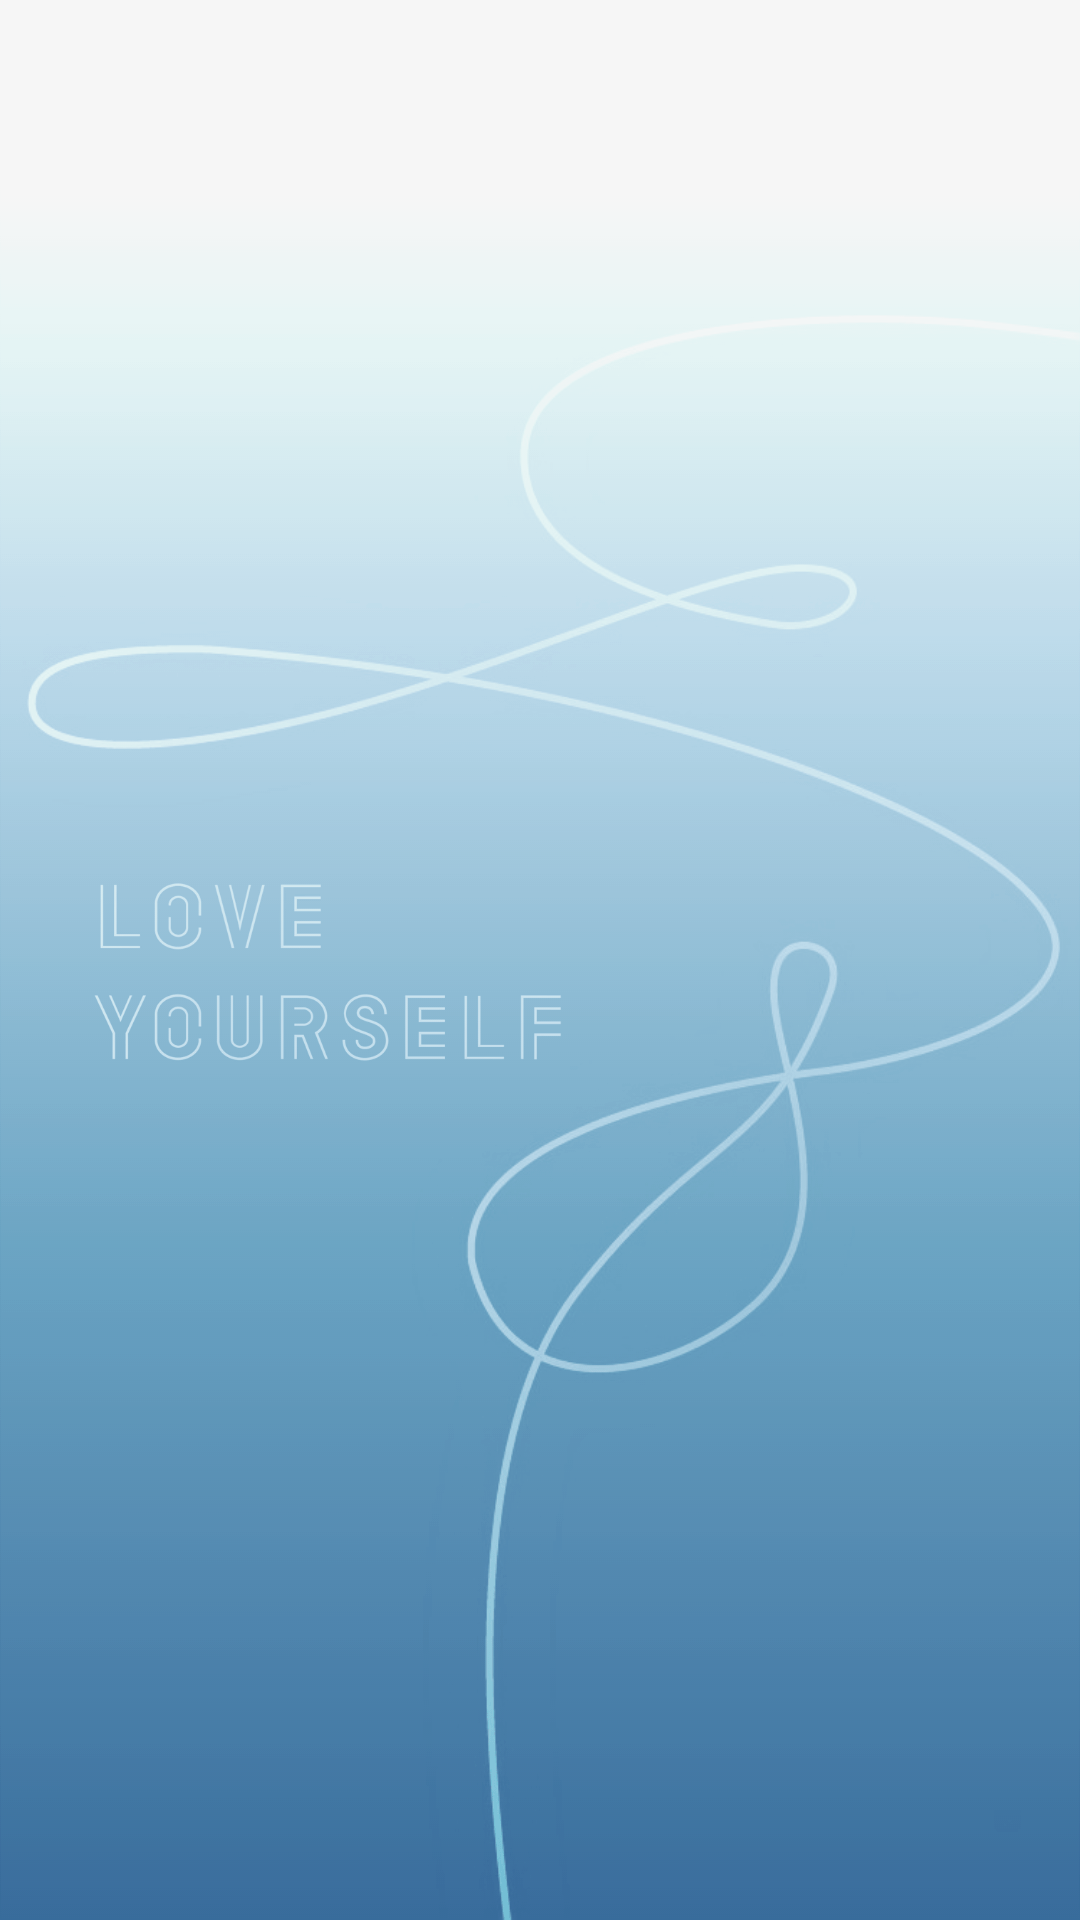 Bts Love Yourself Iphone Wallpapers Wallpaper Cave